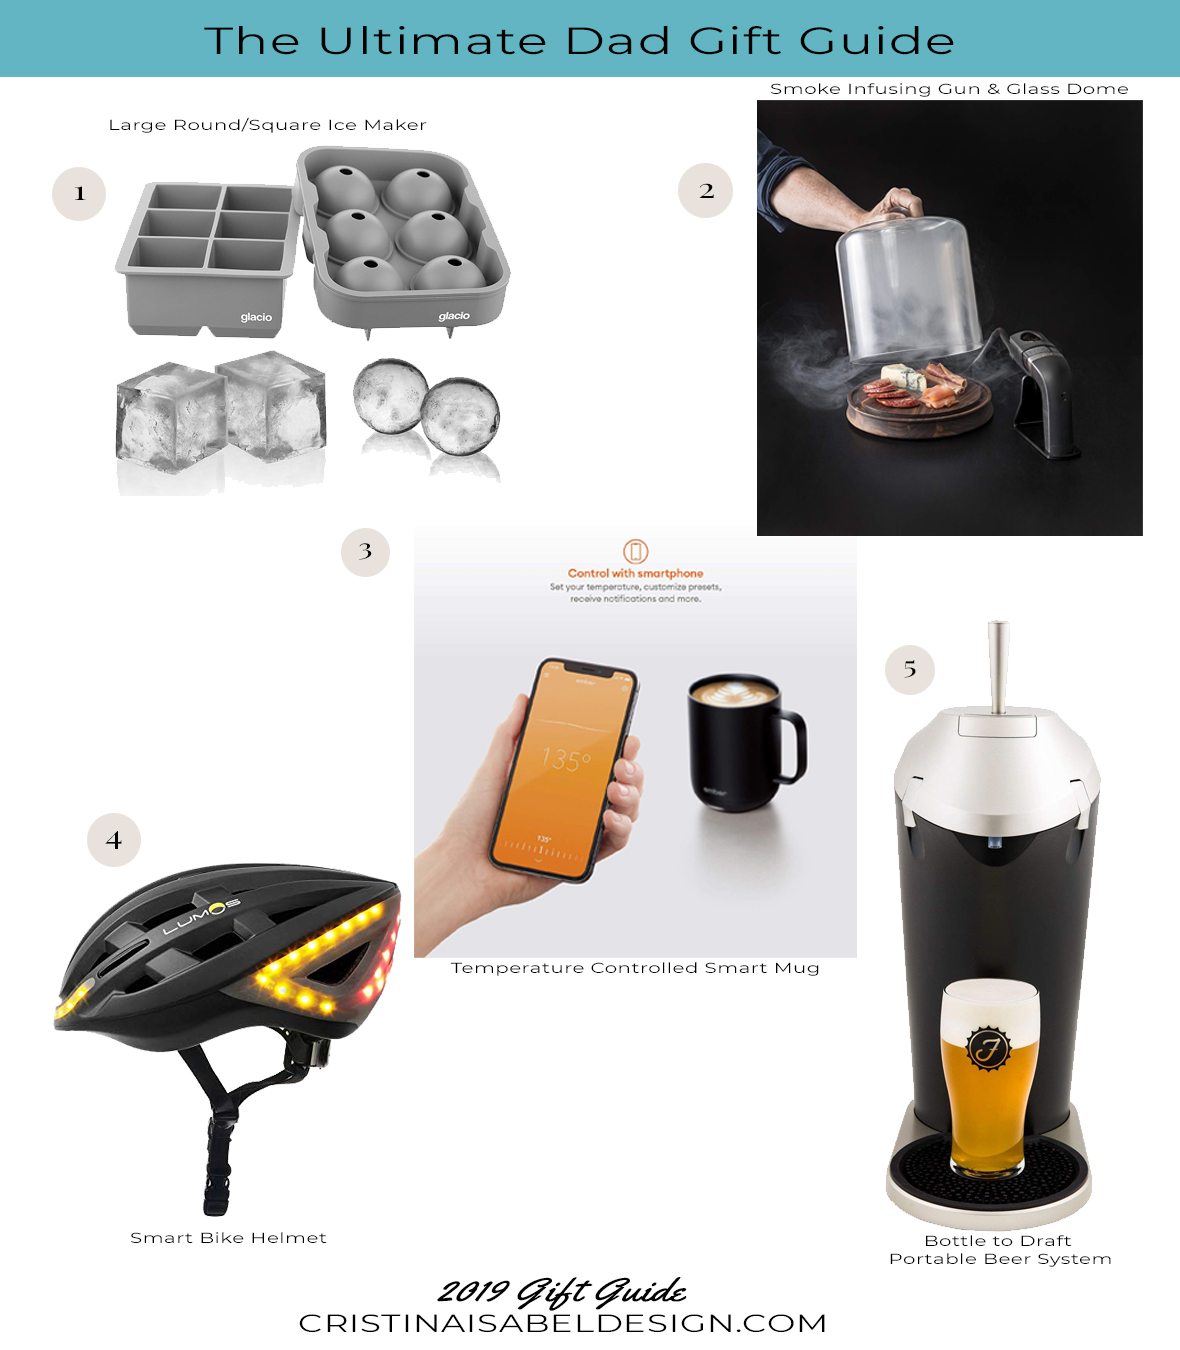 Our Favorite Home Products Gift Guide Tech Guide